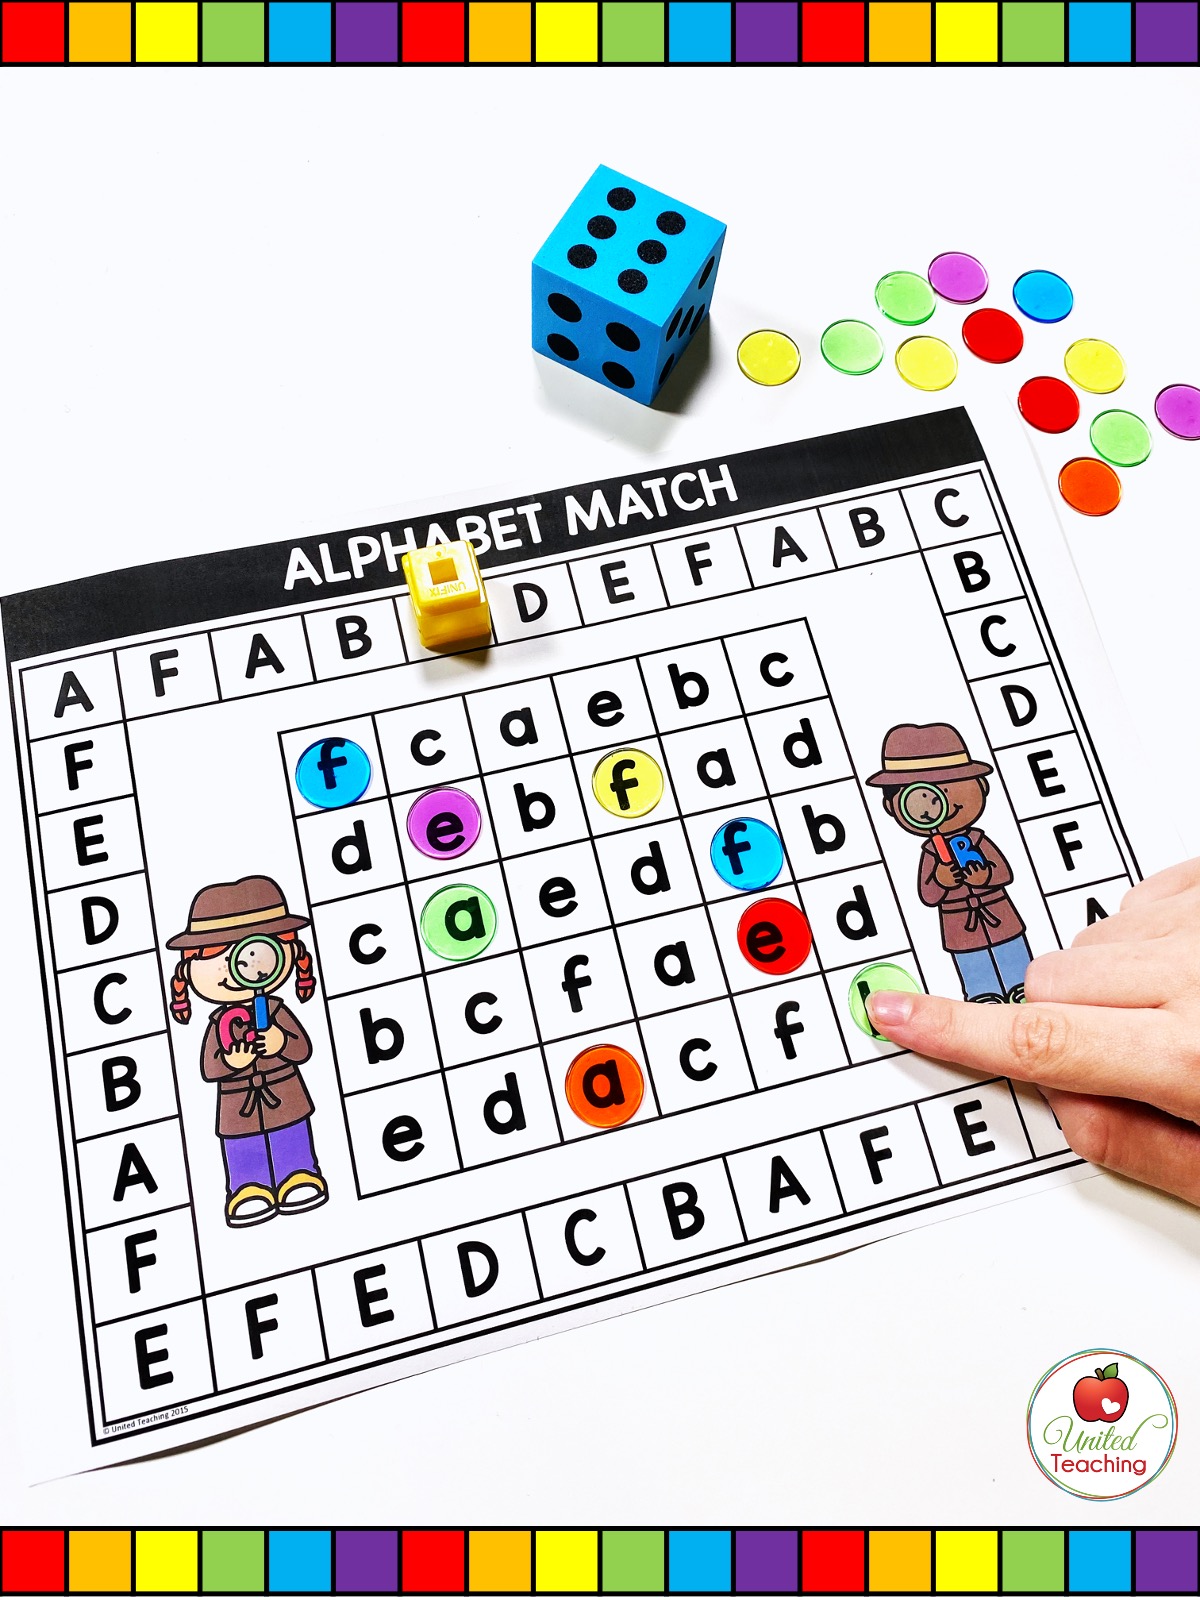 printable-letter-recognition-games-united-teaching